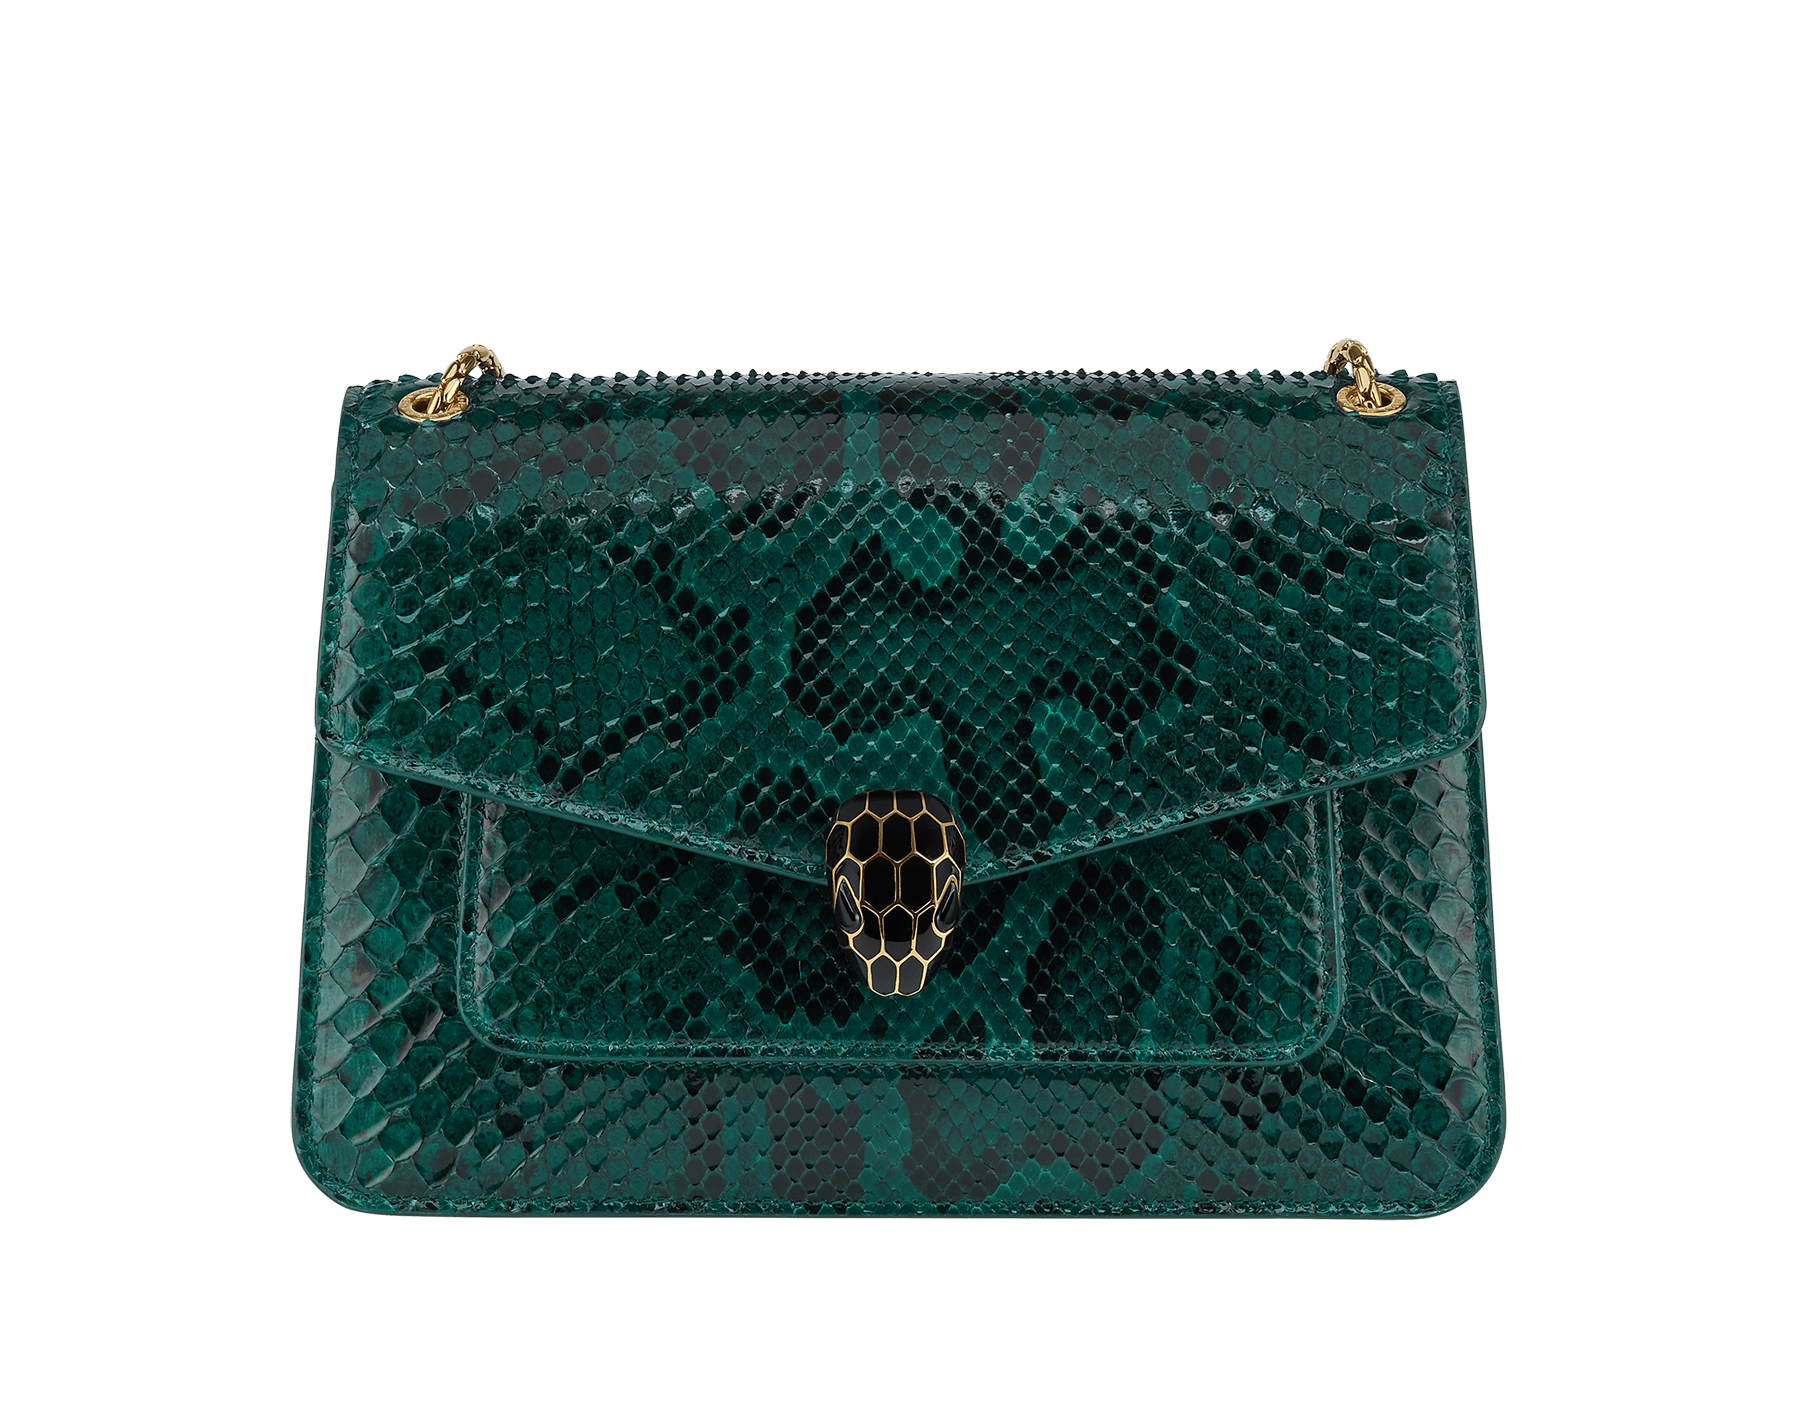 Serpenti Forever medium shoulder bag in Forest Emerald green shiny python skin with black nappa leather lining. Captivating snakehead press button closure in gold-plated brass embellished with black enamel scales, and black onyx eyes. 292580 image 1